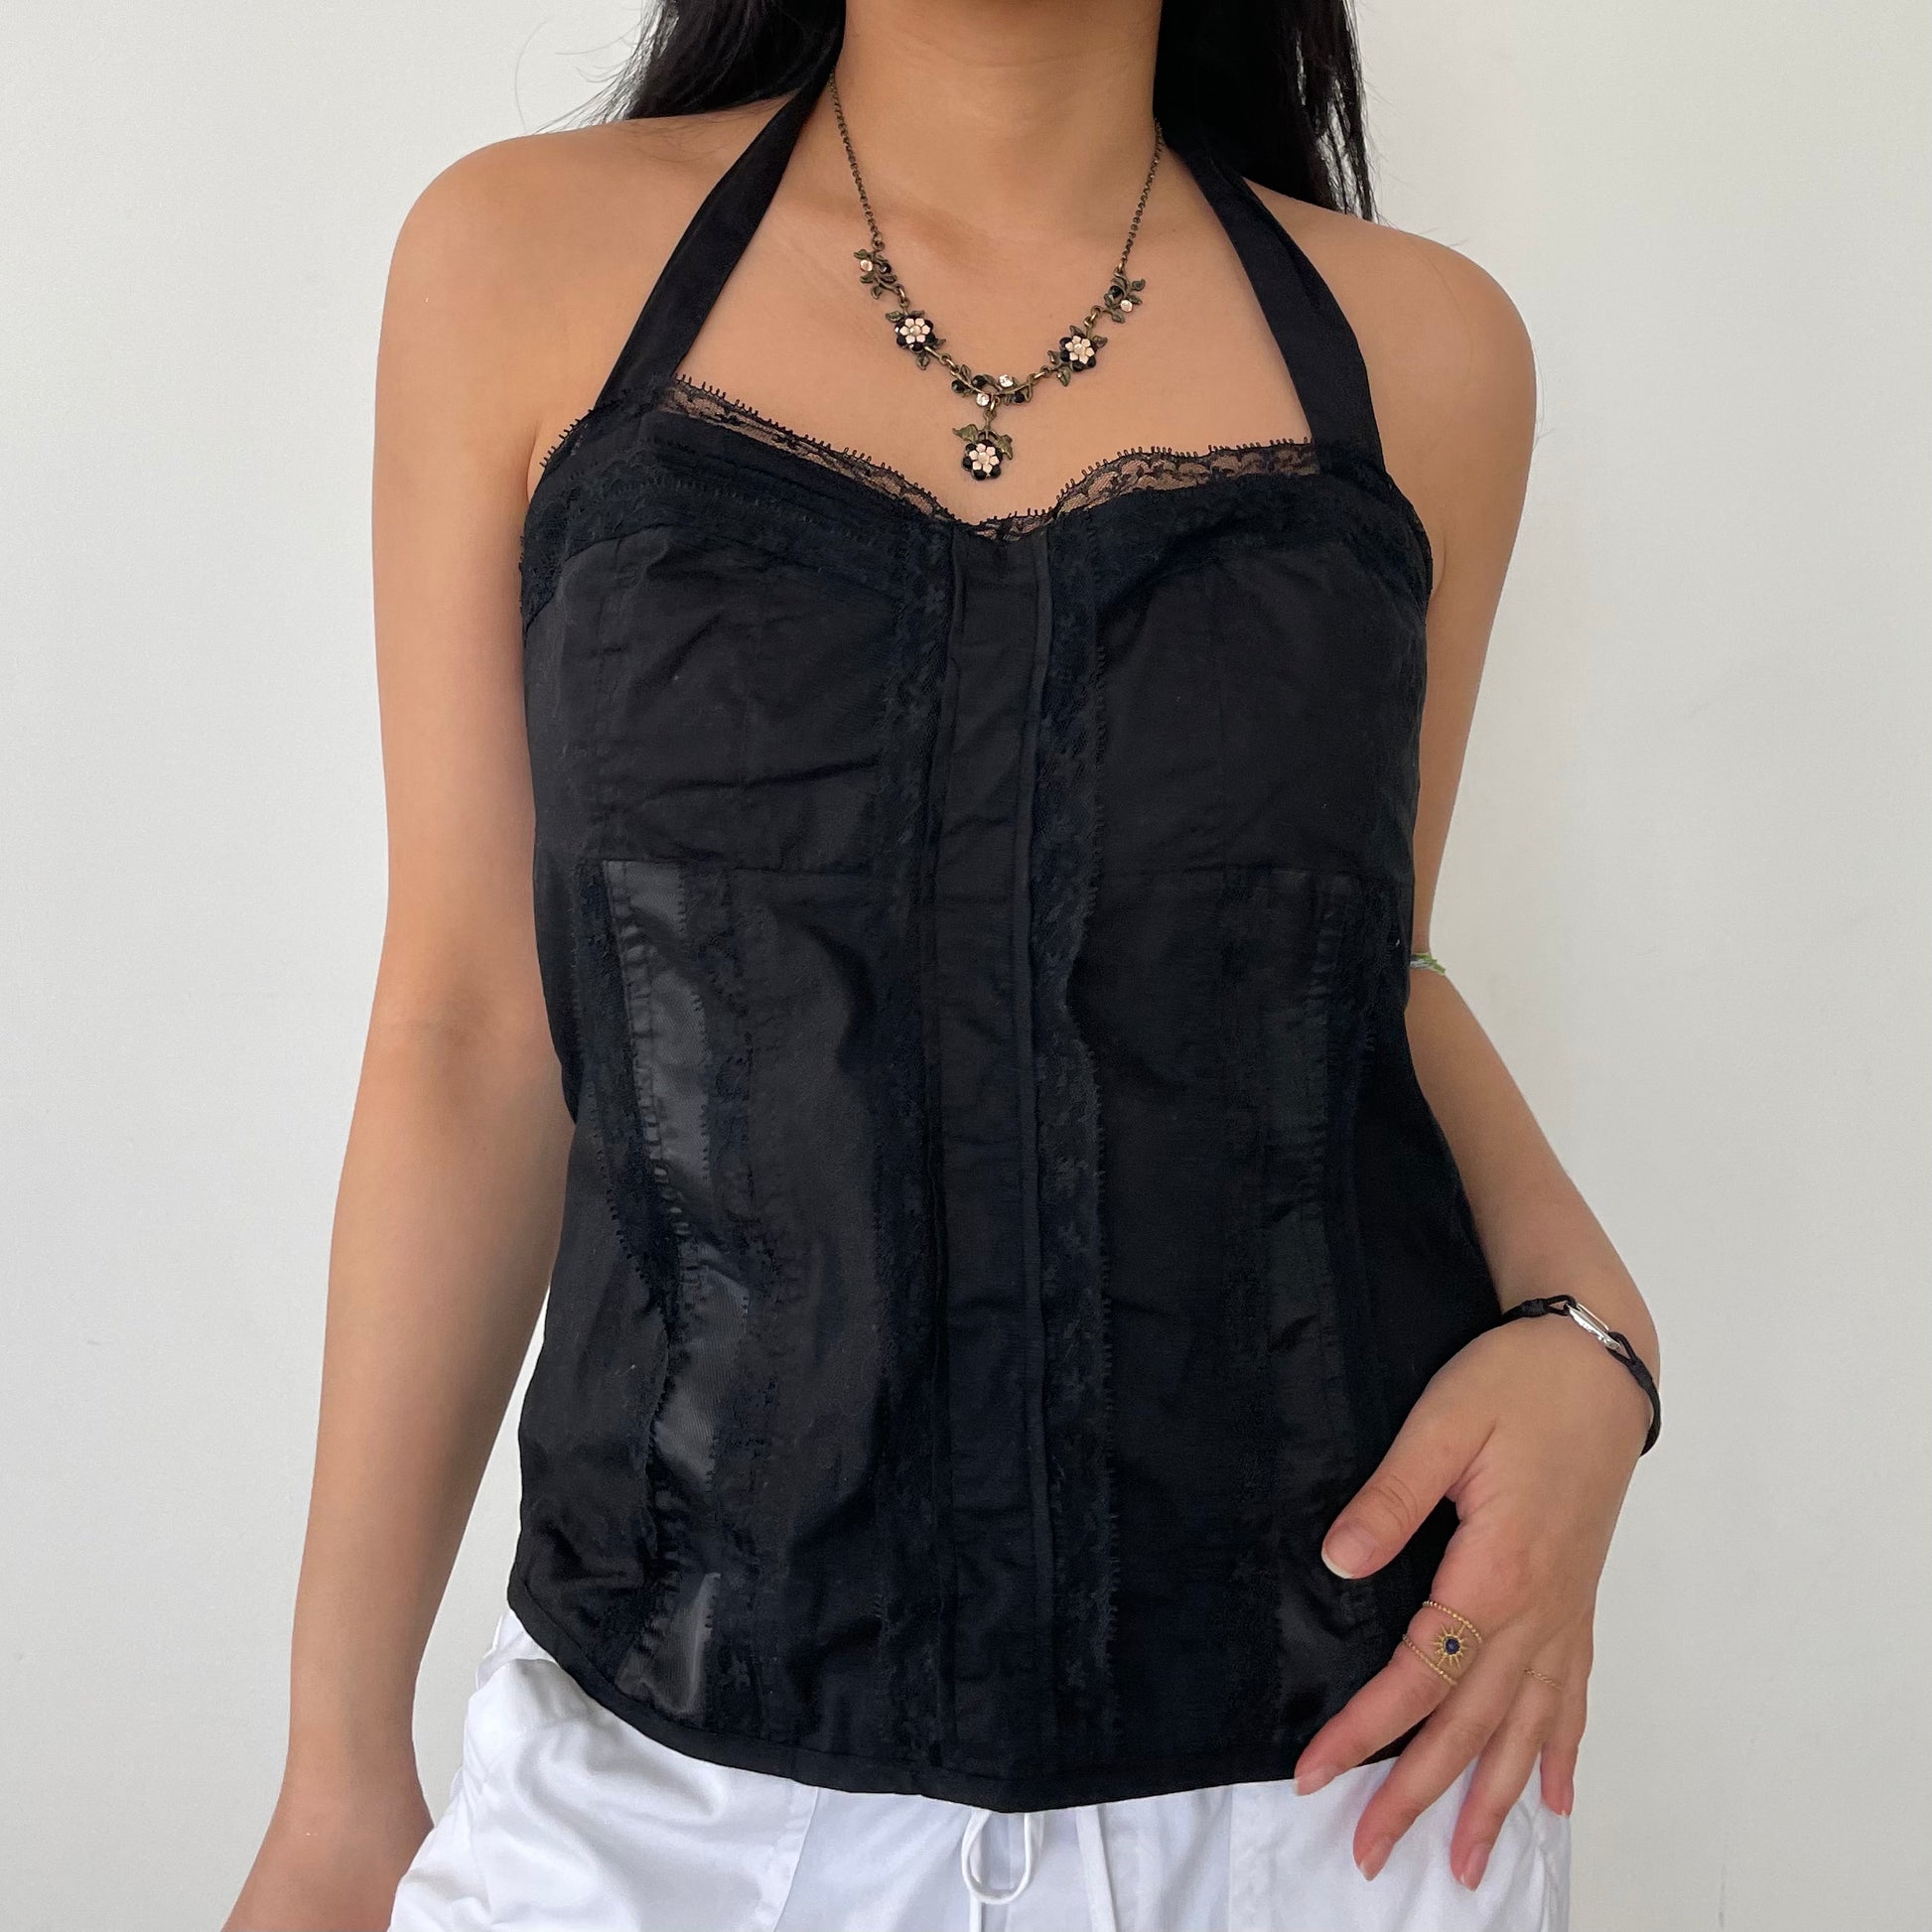 Candy Couture Black Halter Neck Lace Corset Tank Top - Small – Zoehify